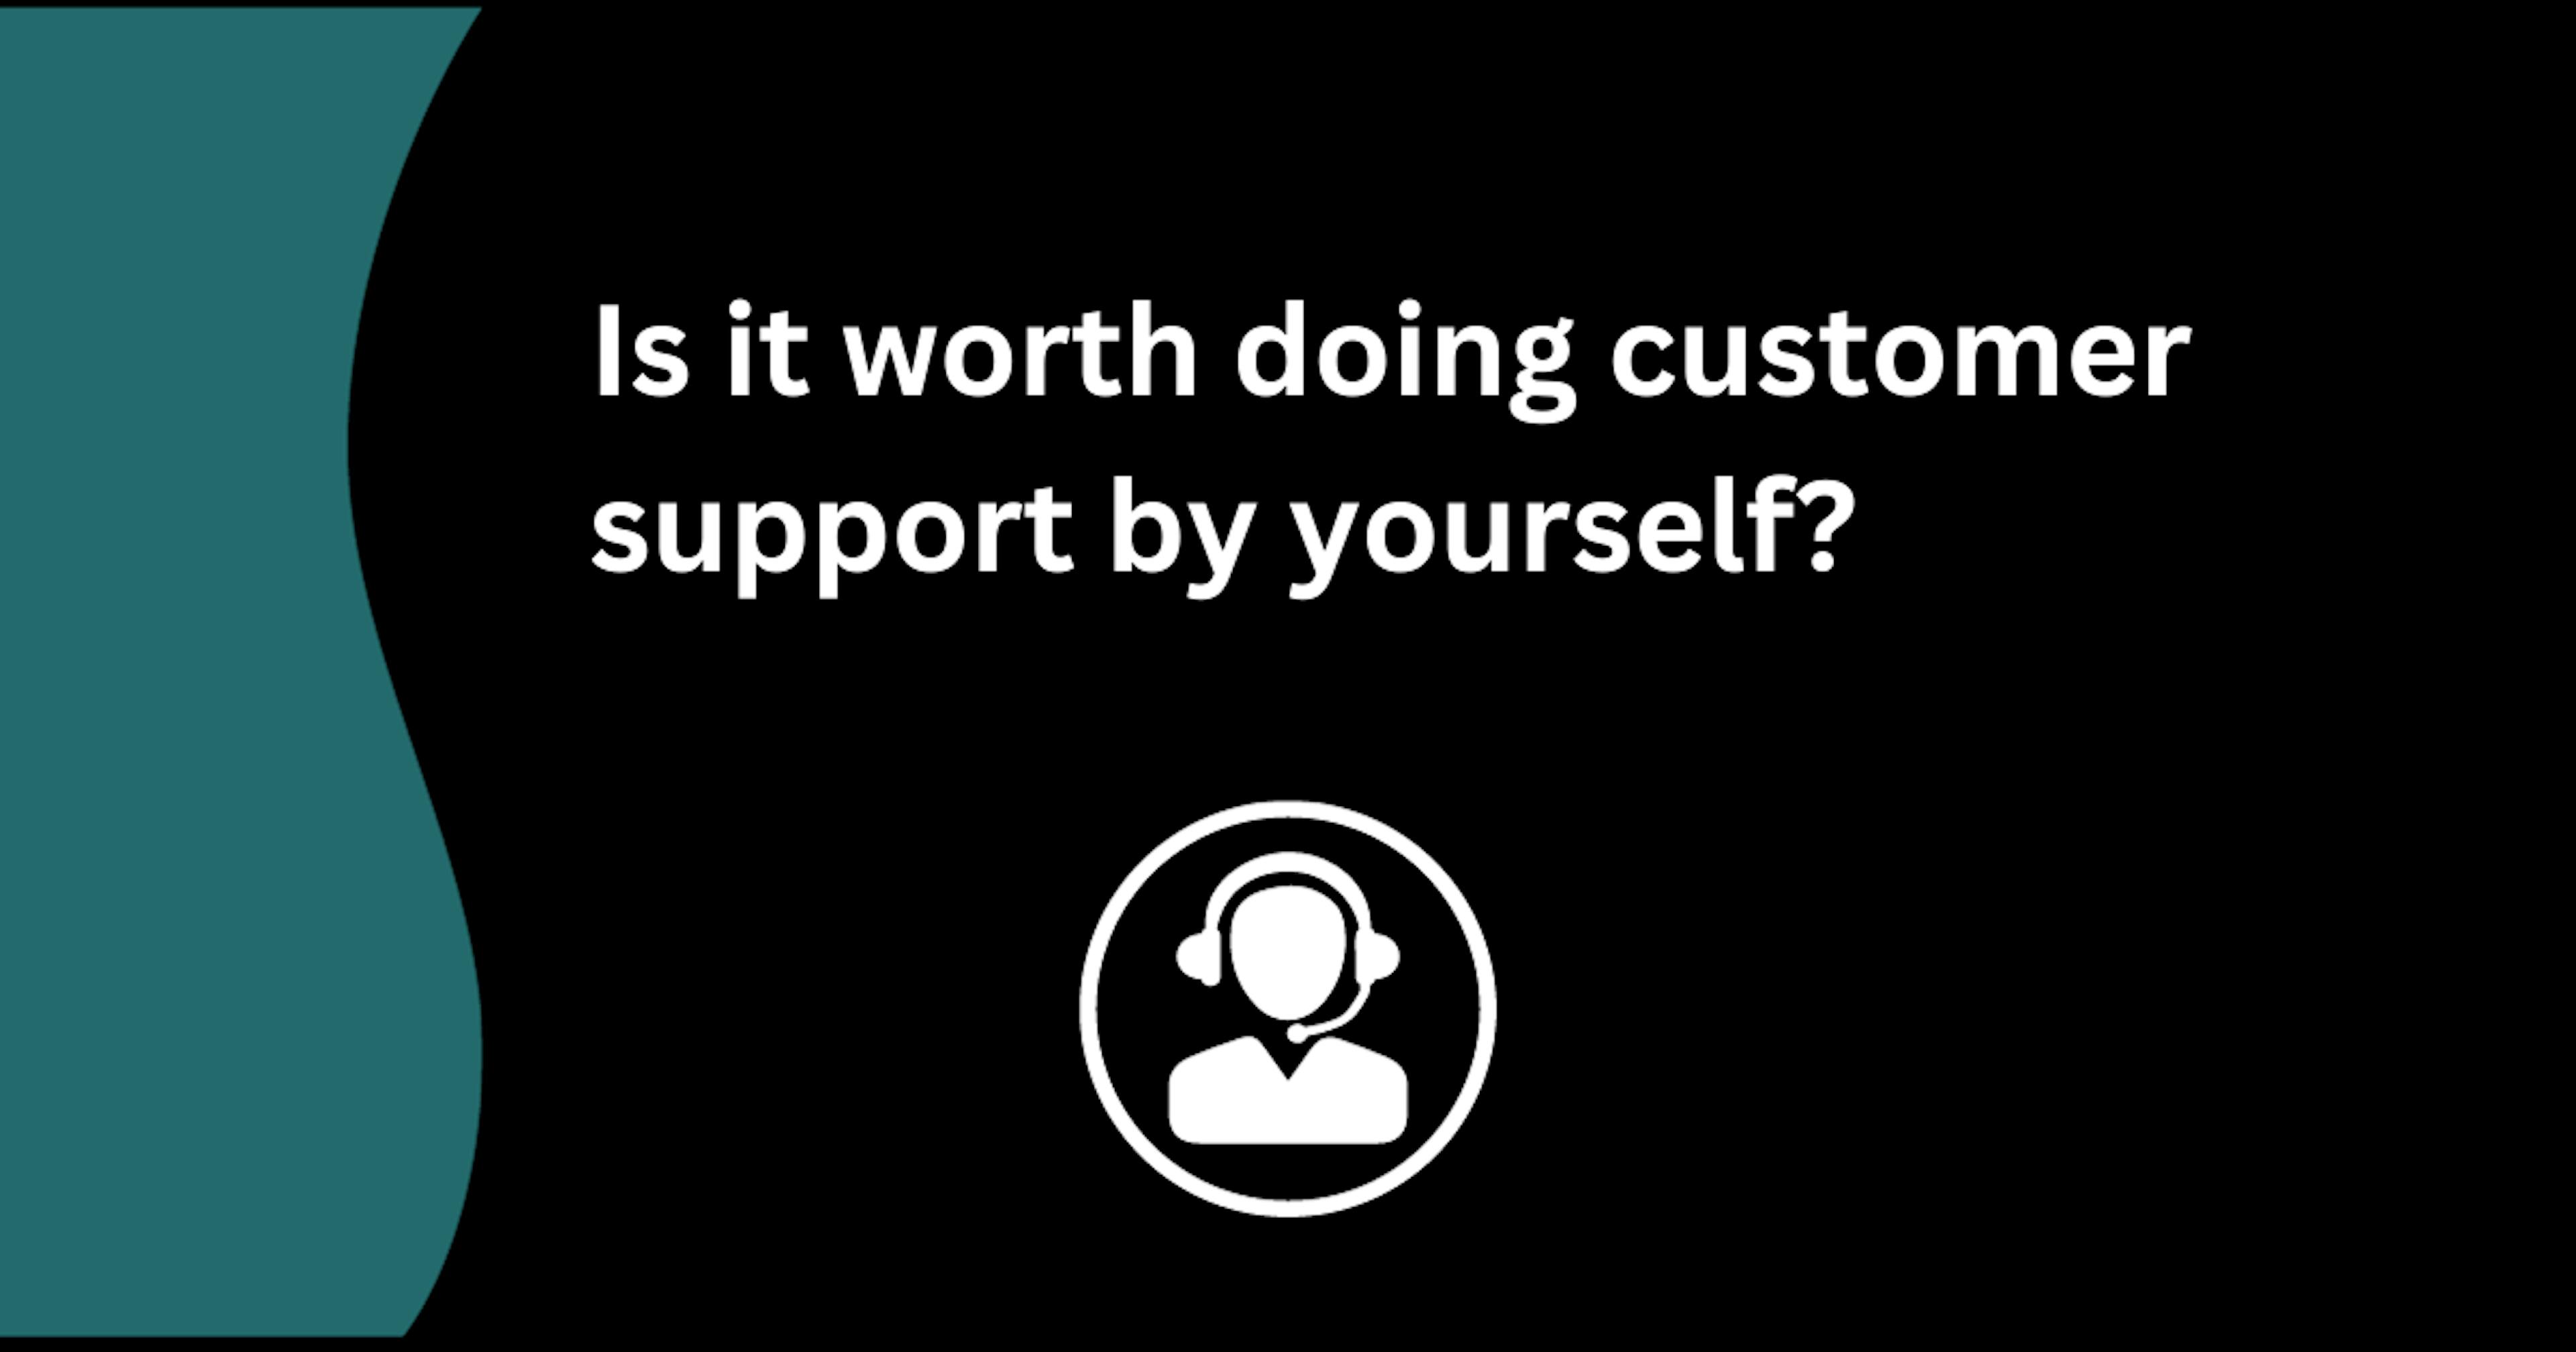 Doing customer support by yourself as an entrepreneur